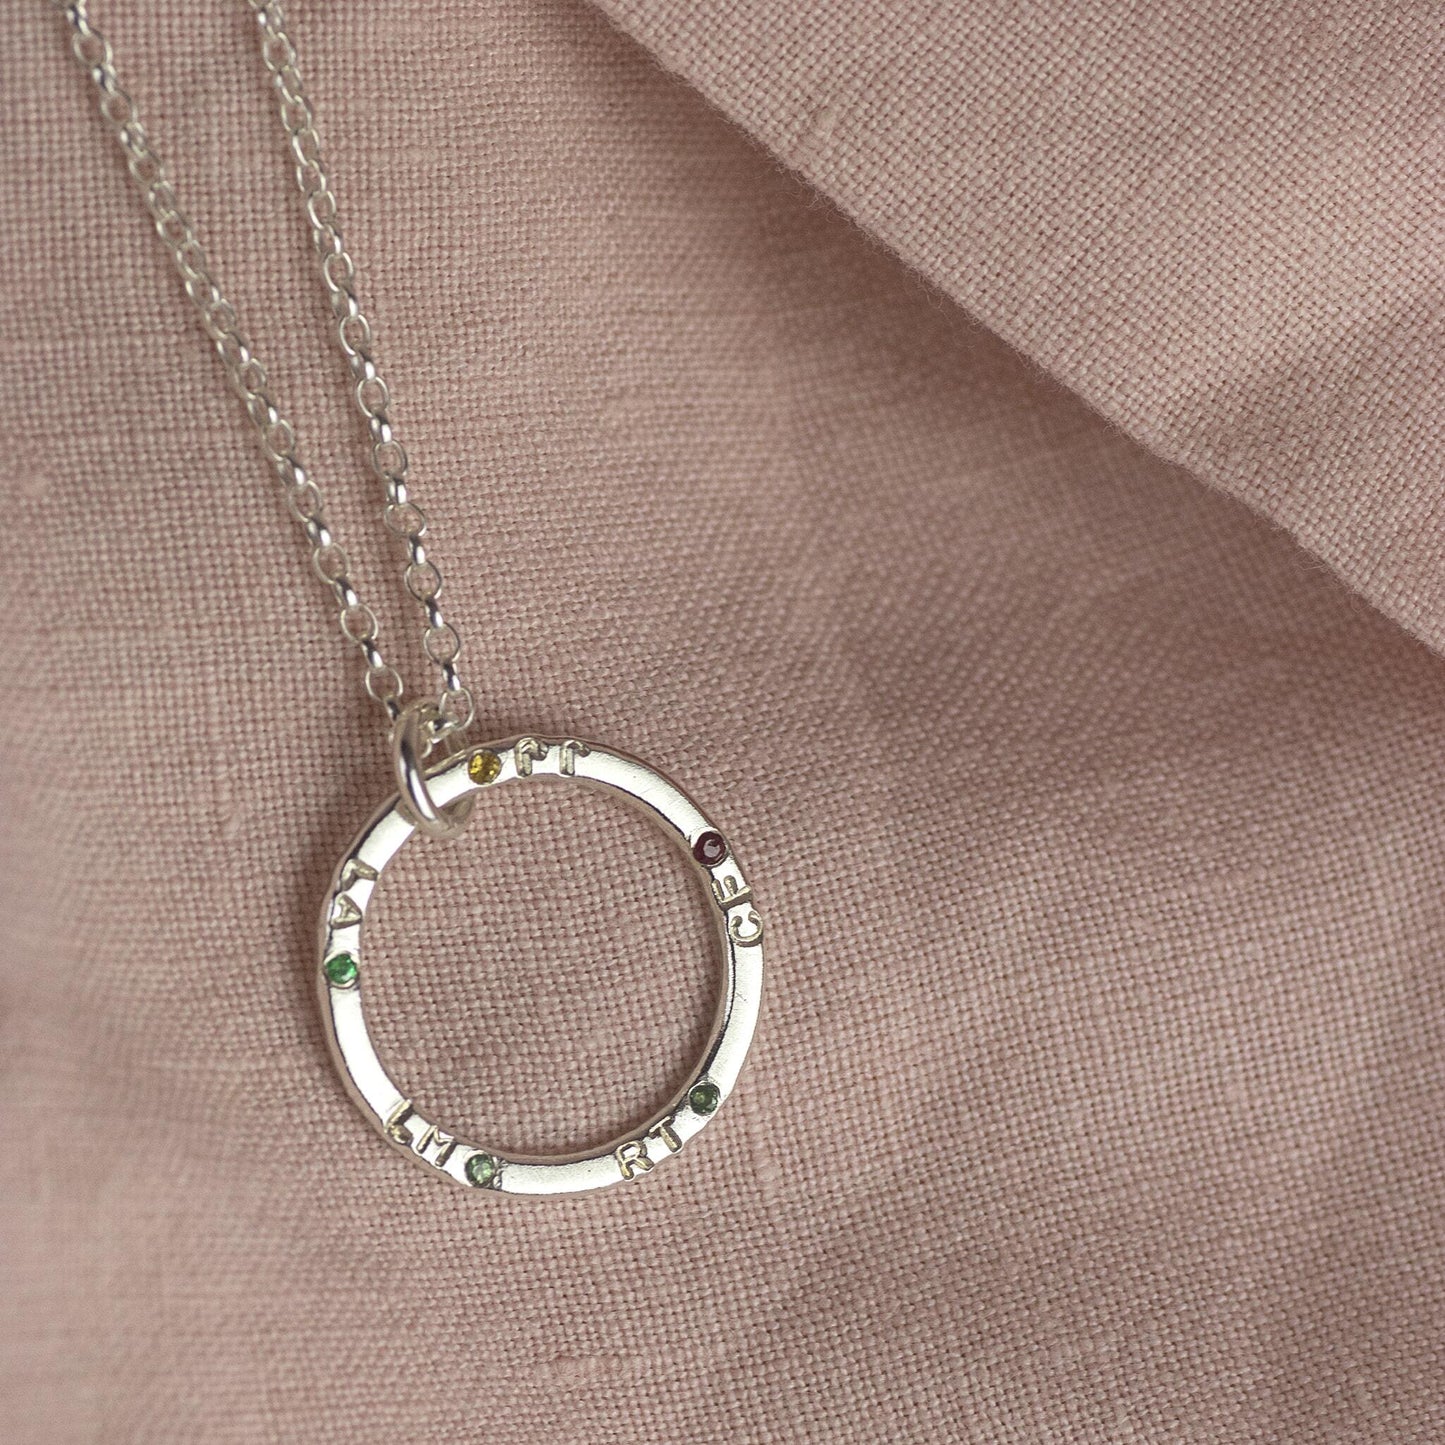 Family Circle Necklace - Hand-Stamped - Silver